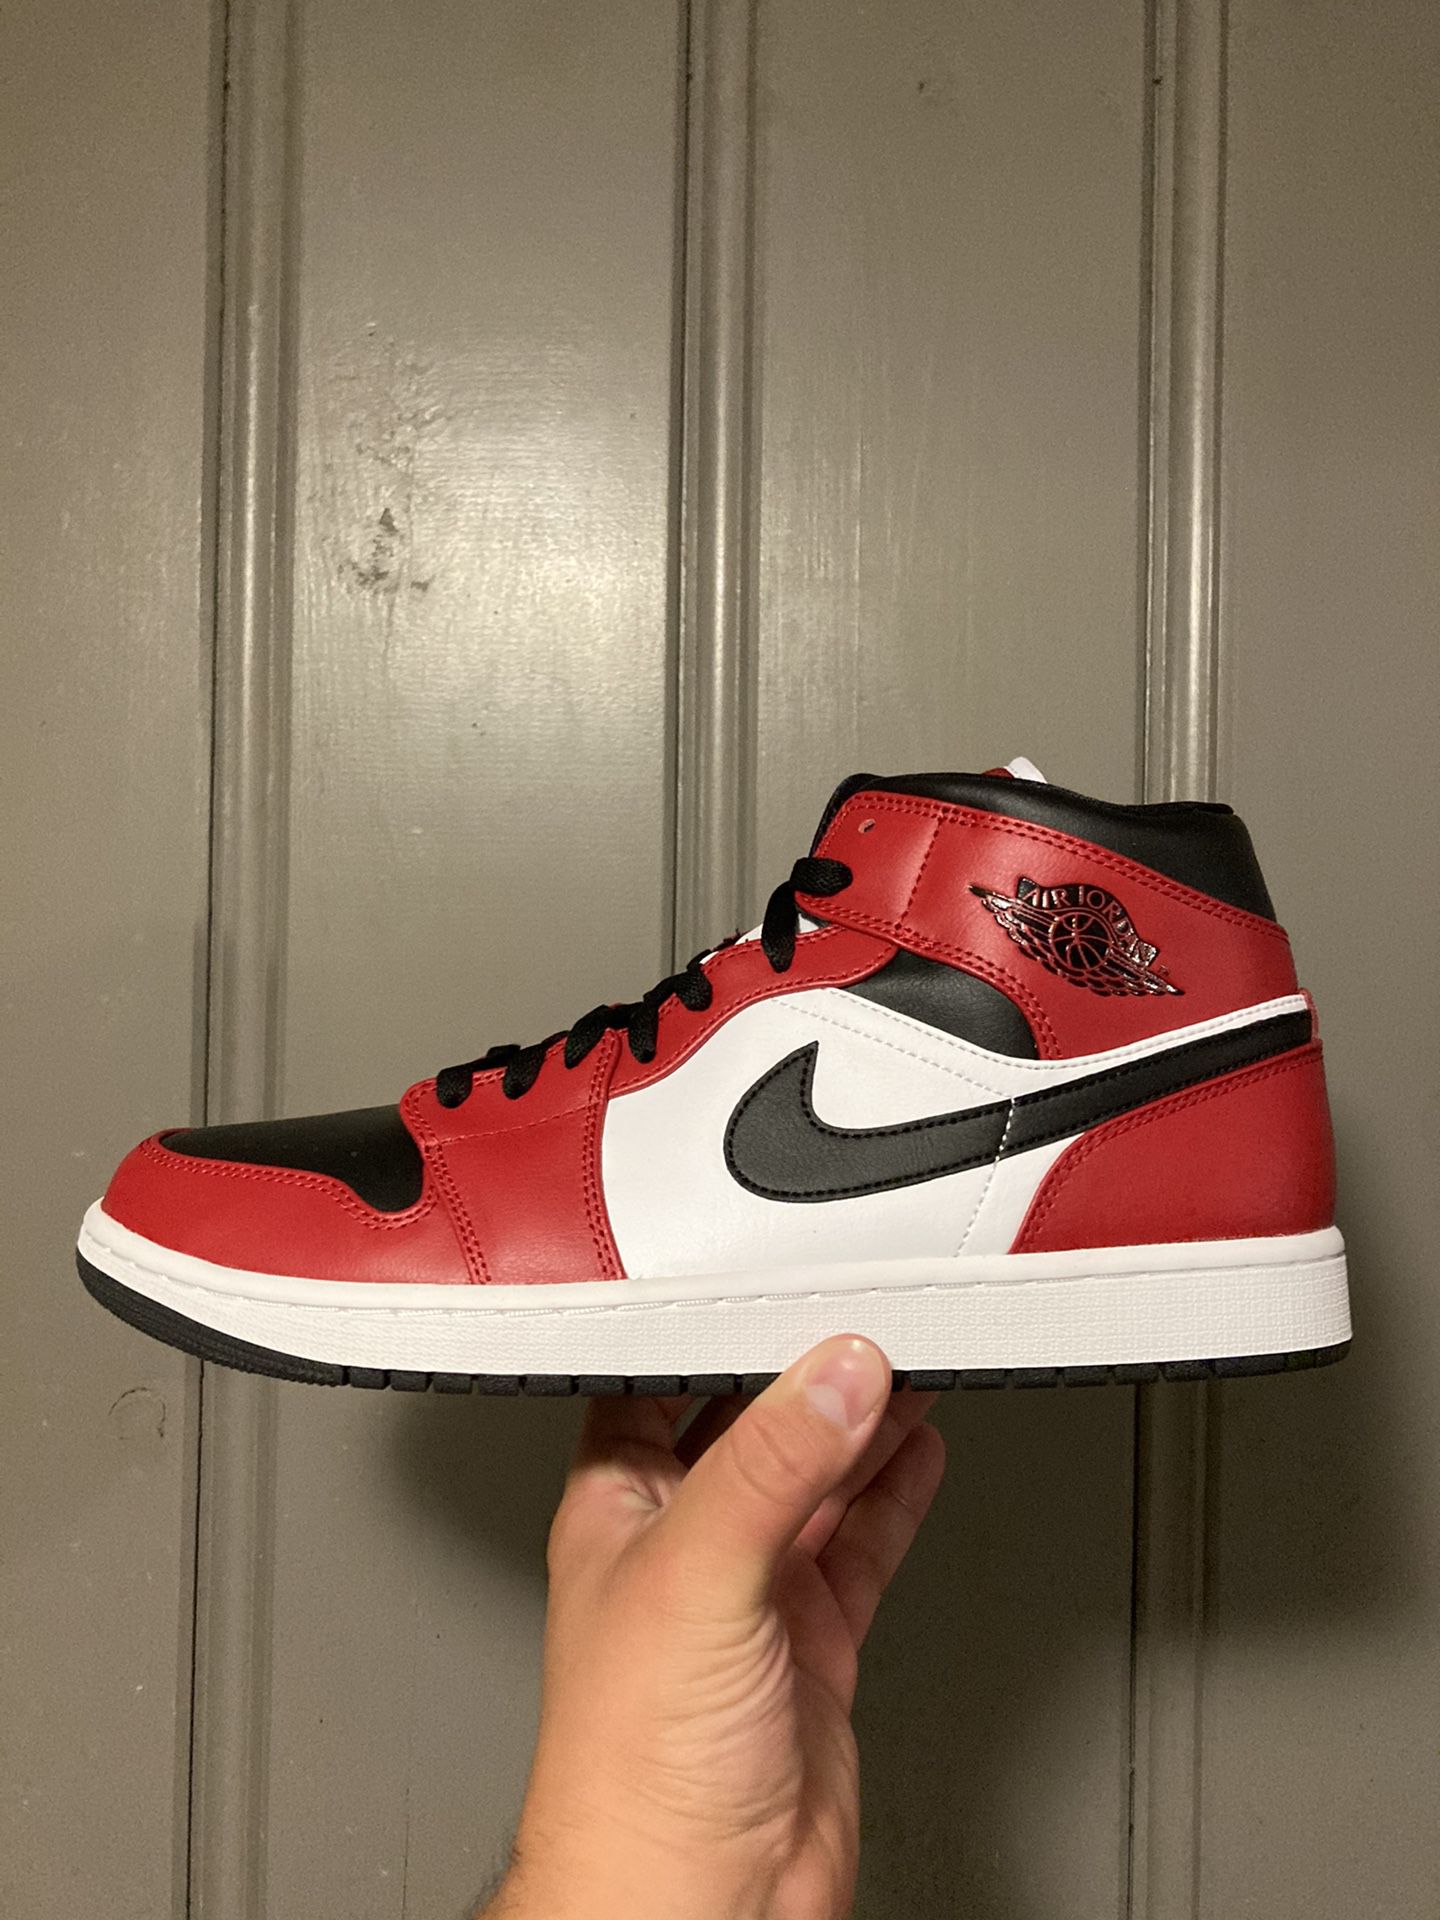 Jordan 1 retro mid “Chicago toe” size (11.5) in men’s. $100. Worn 1x in excellent condition. Comes with OG all and receipt. Local pick ups in Provide